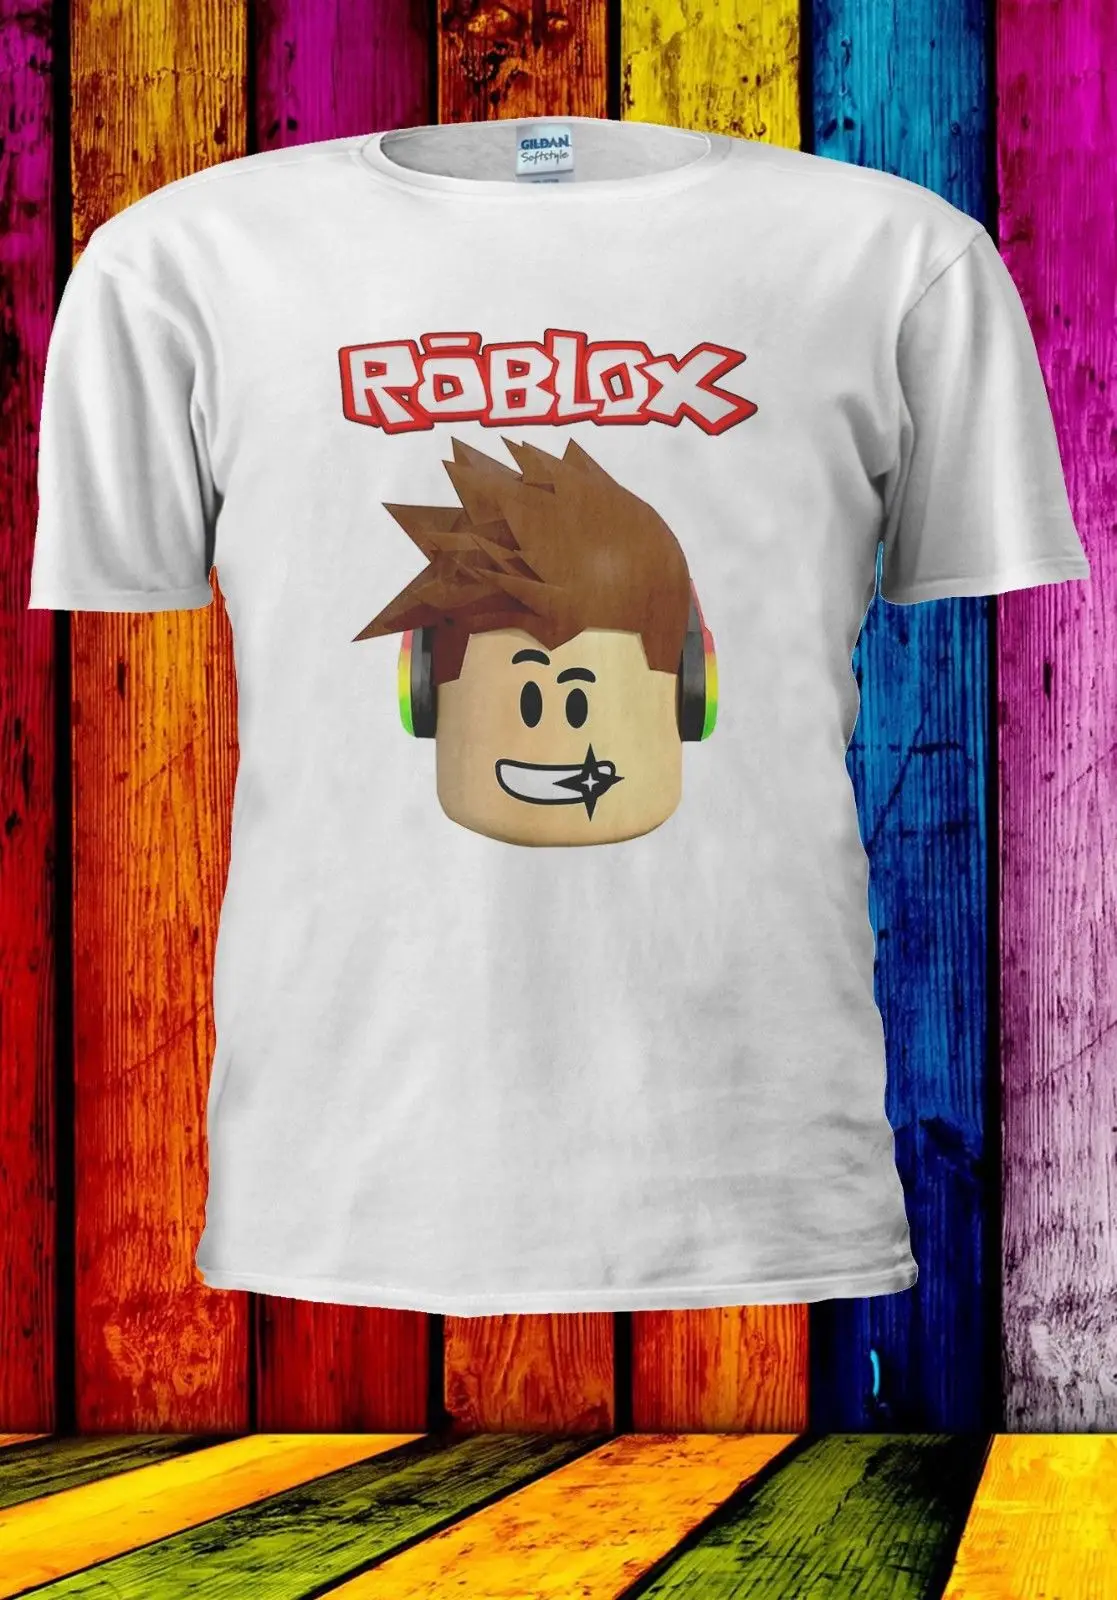 How To Make Your Own T Shirts On Roblox لم يسبق له مثيل الصور